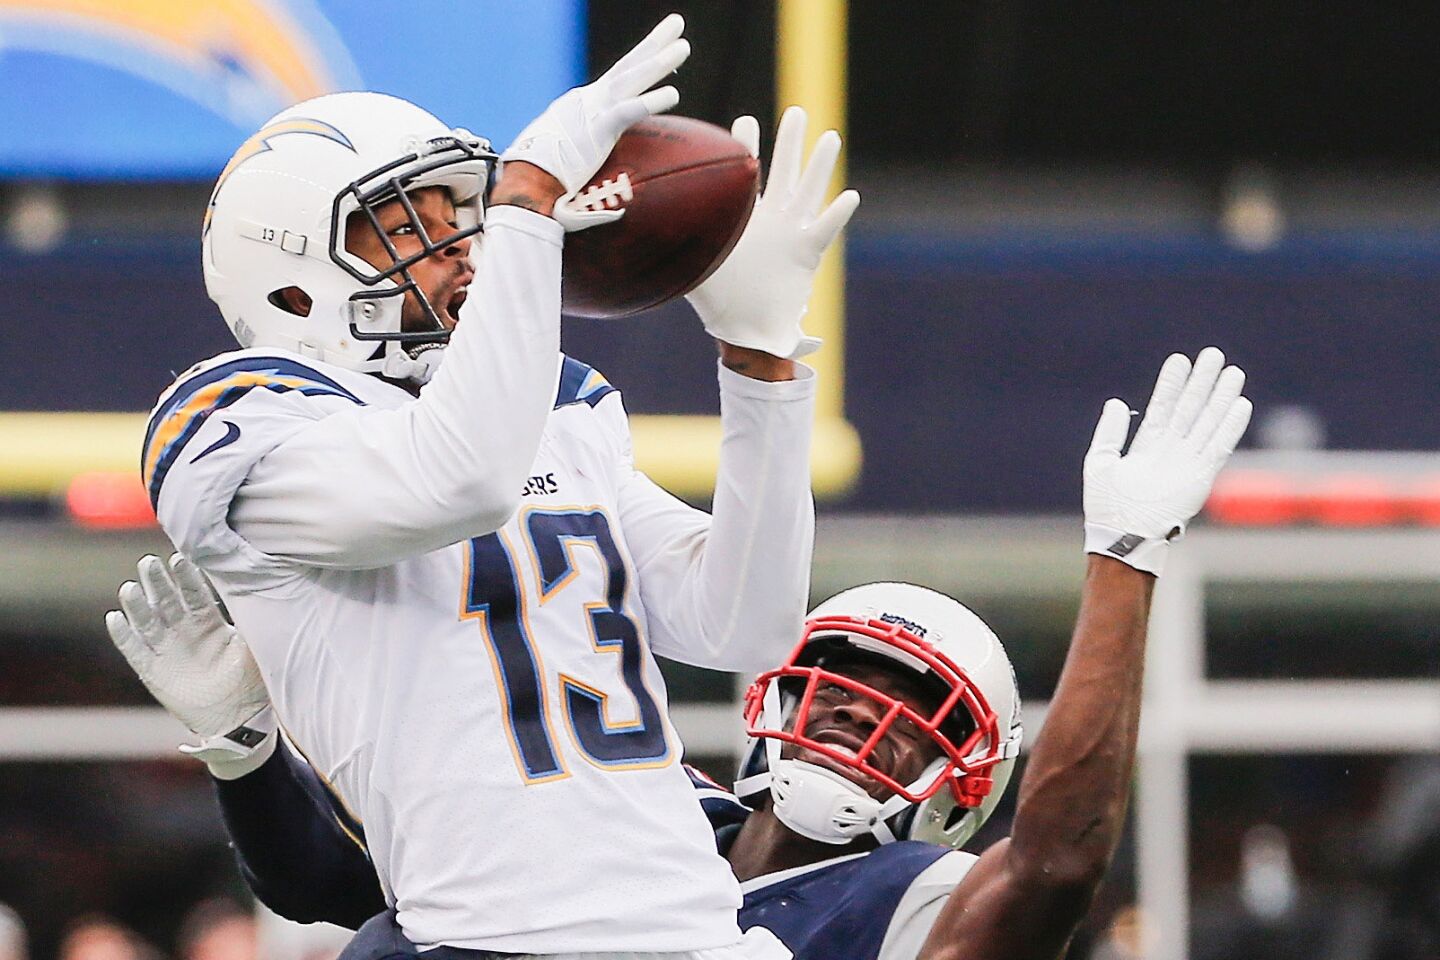 The Chargers' Keenan Allen catches a pass as he is defended by the Patriots' Johnson Bademosi during the third quarter.